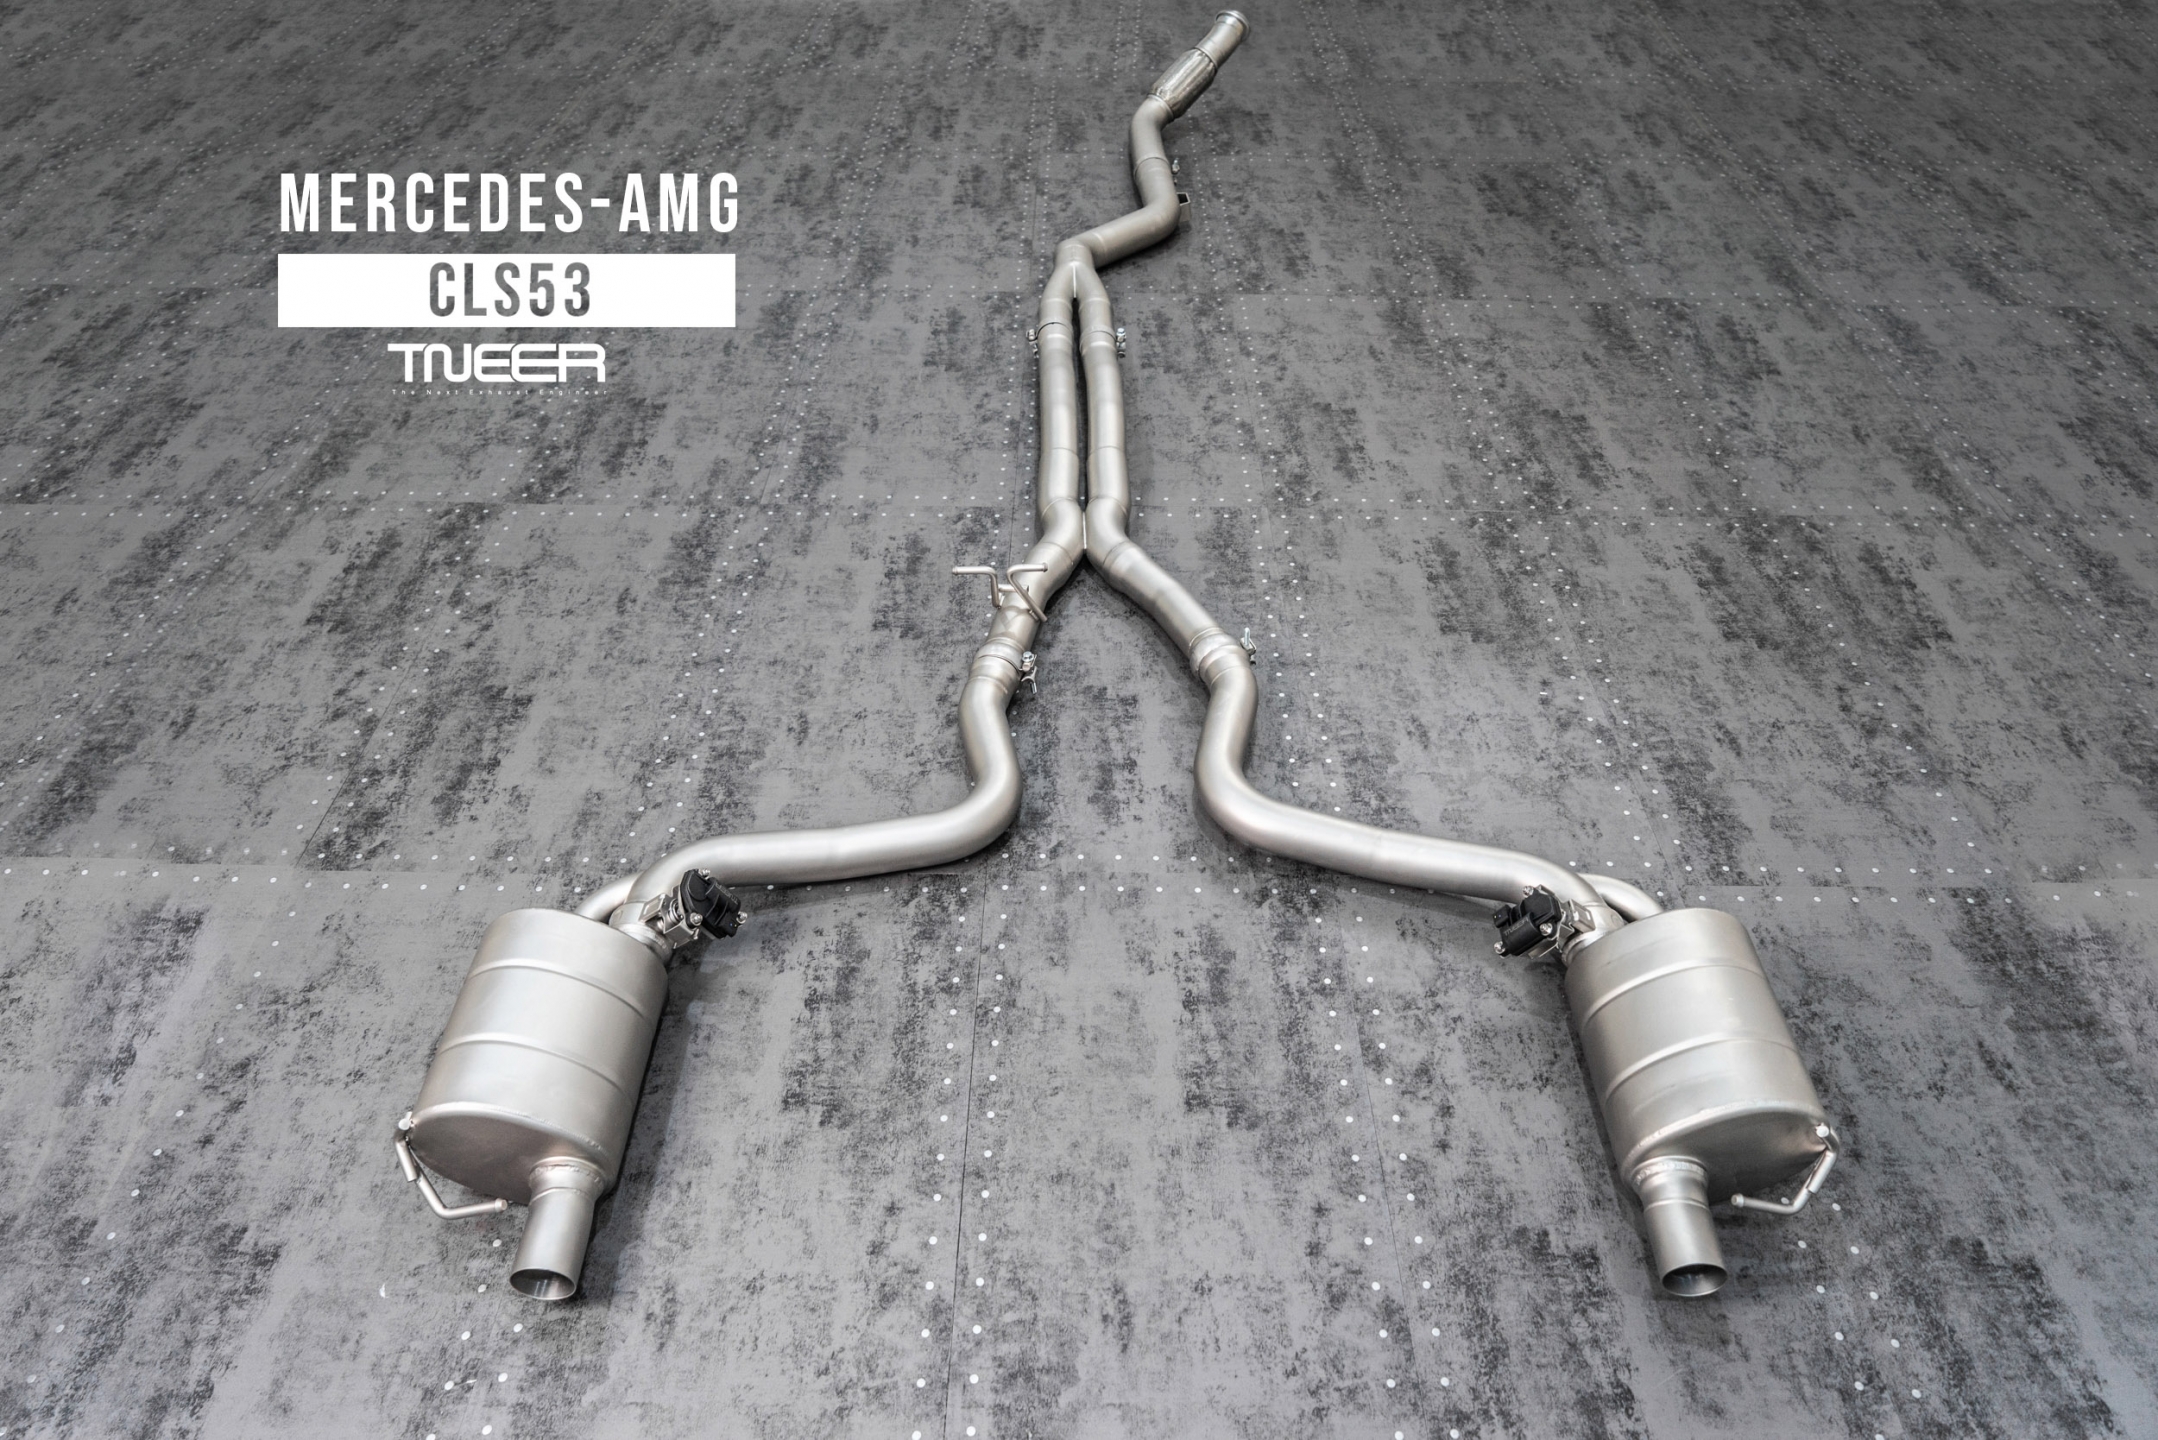 BMW F12 (M6 Coupe) TNEER Downpipes